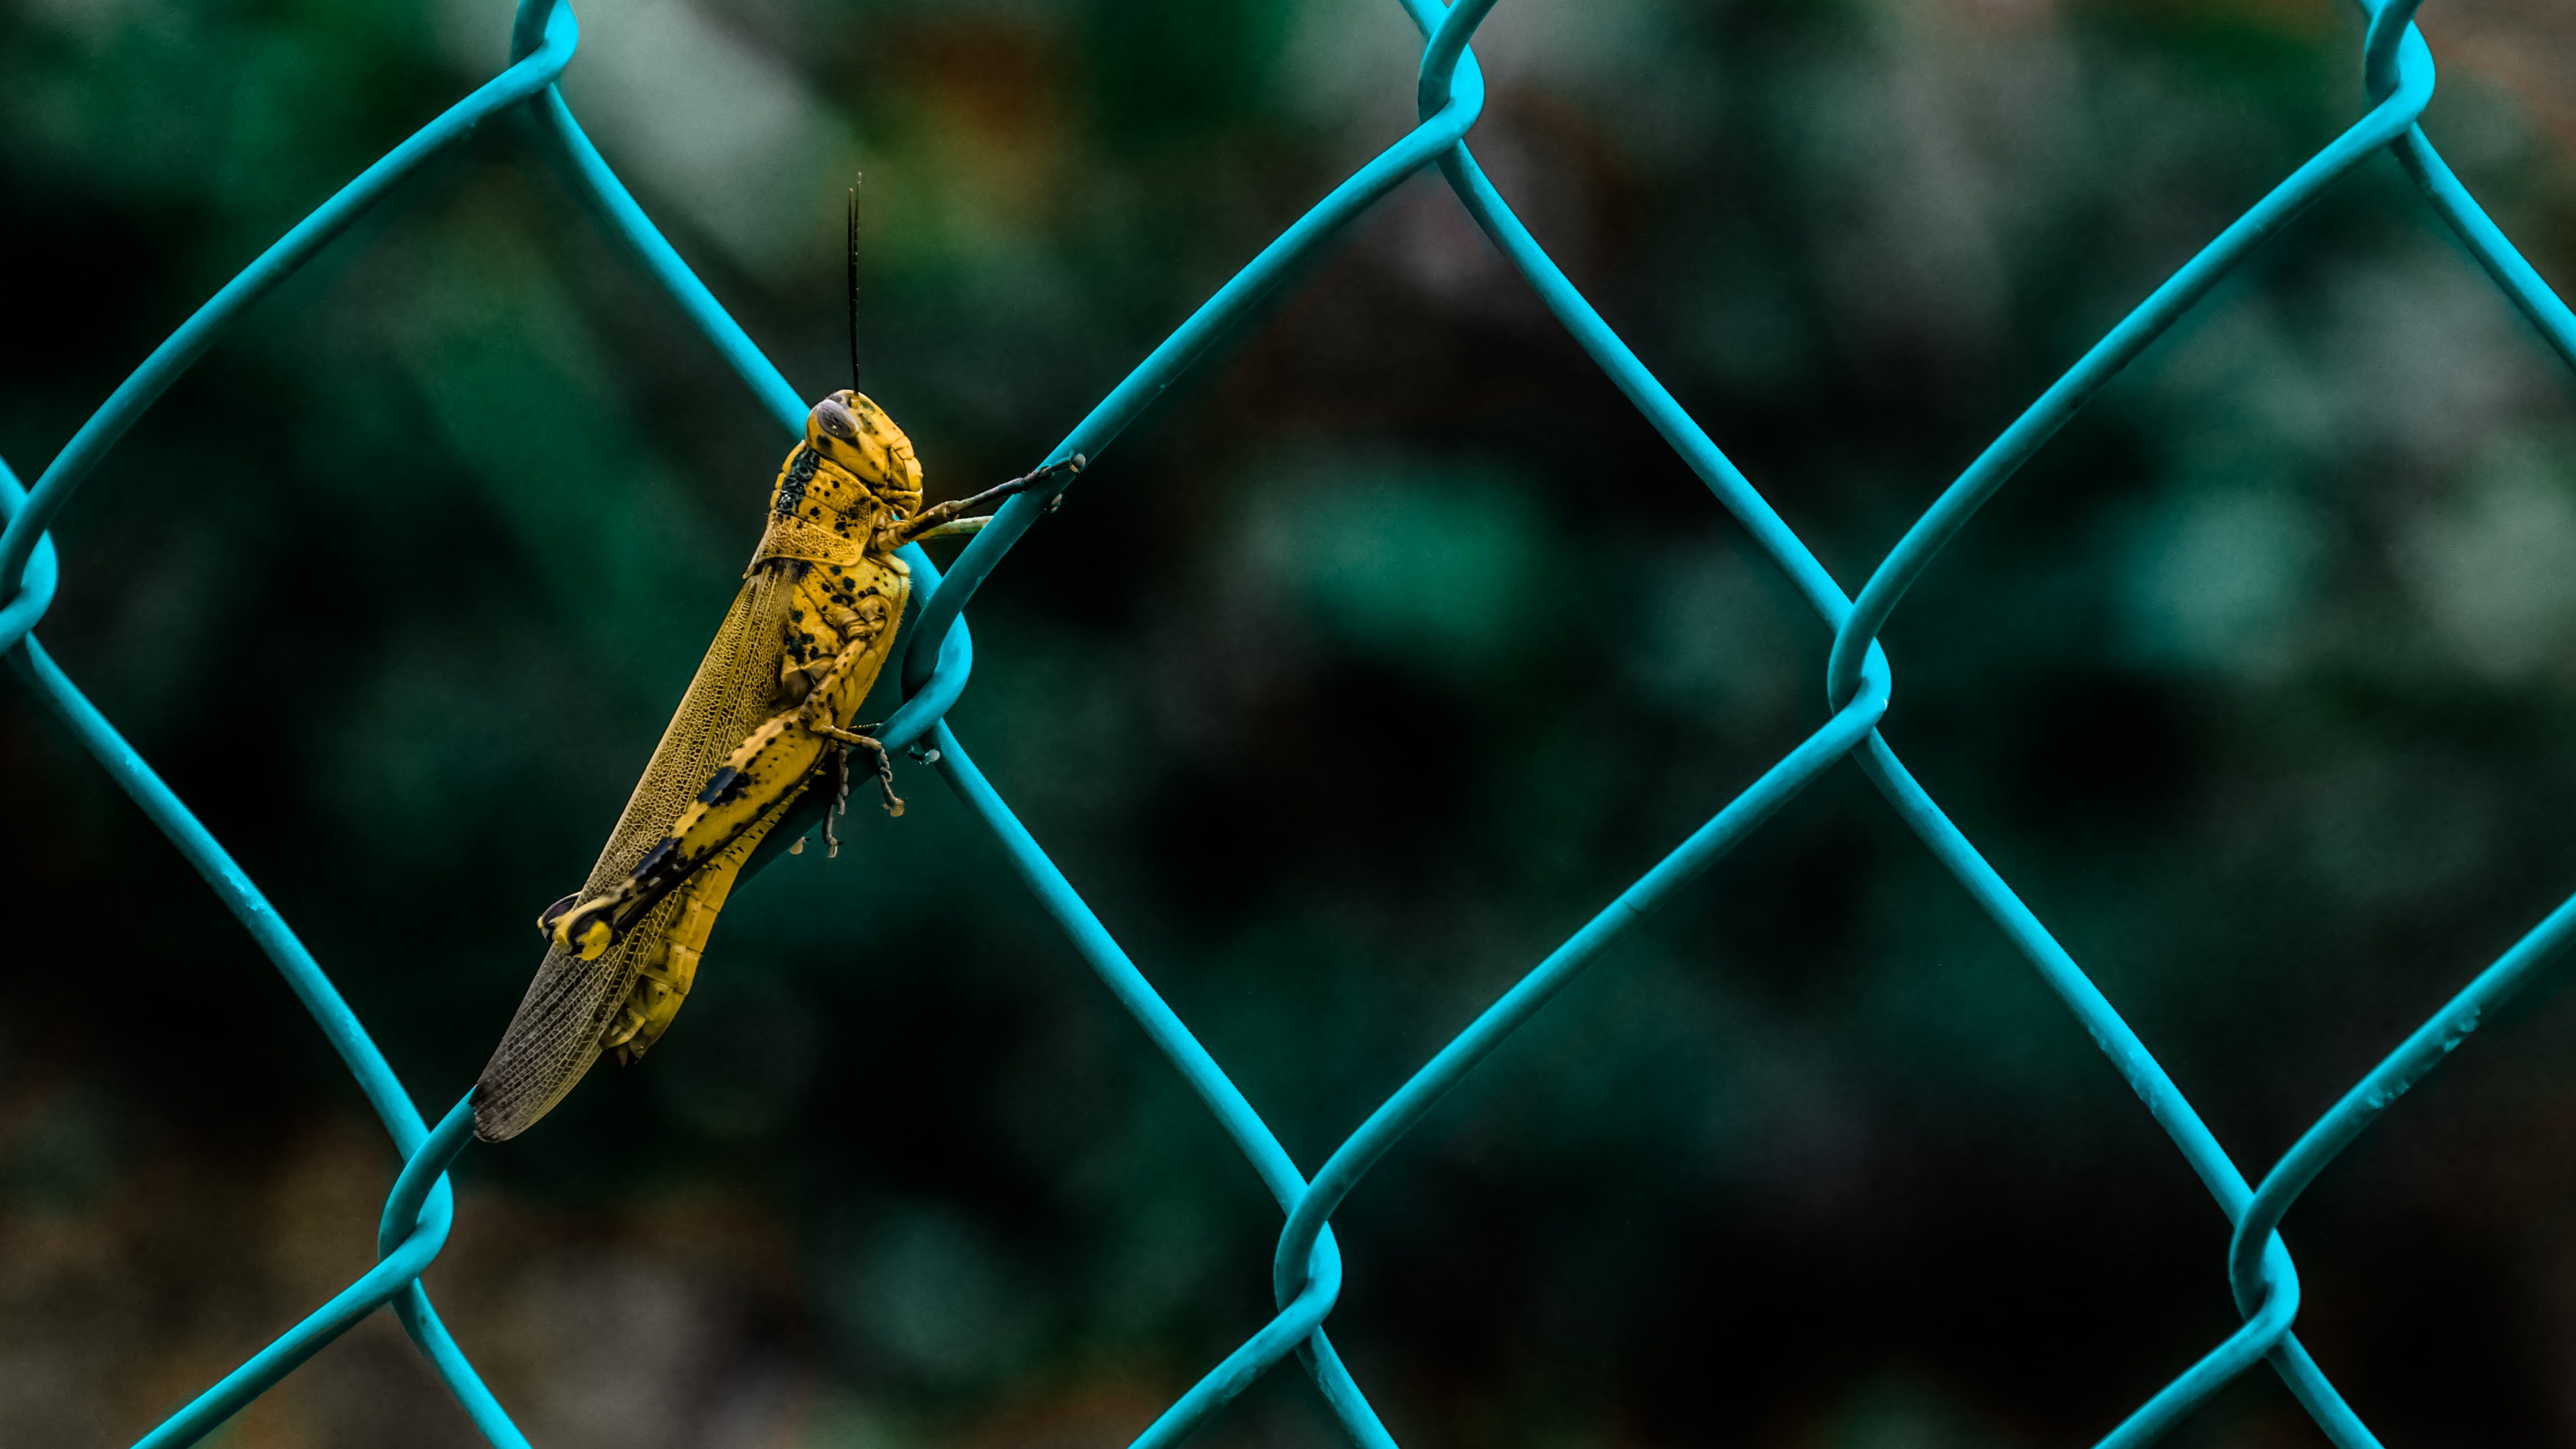 Yellow and Black Grasshopper on Teal Cyclone Wire Fence during ...